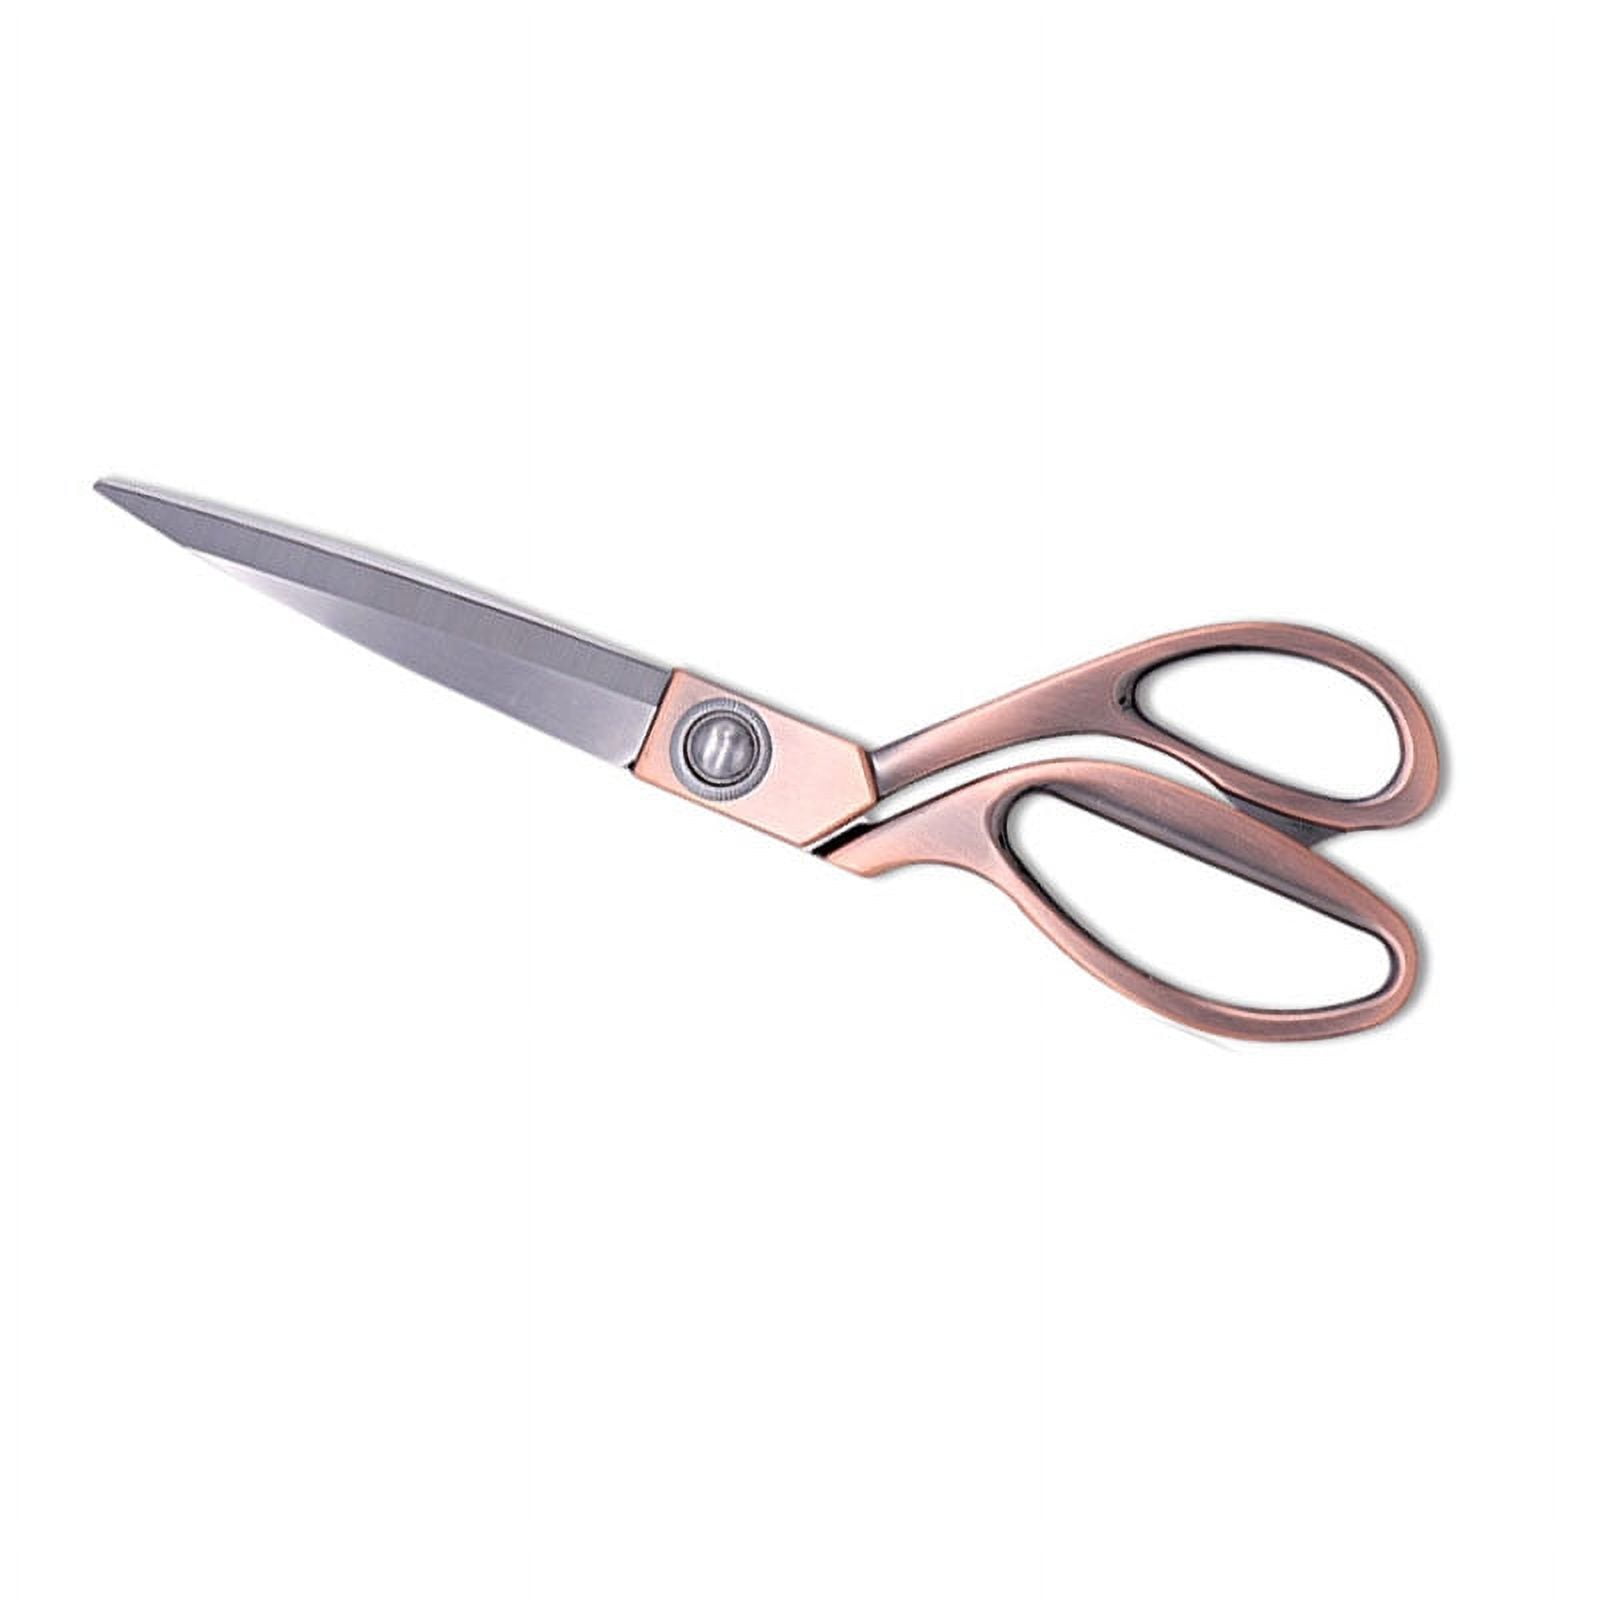 What is Heavy Duty Smart Scissors for Office, Langmingde All Purpose  Stainless Steel Sewing Scissors for Fabric Cutting Cardboard Leather Carpet